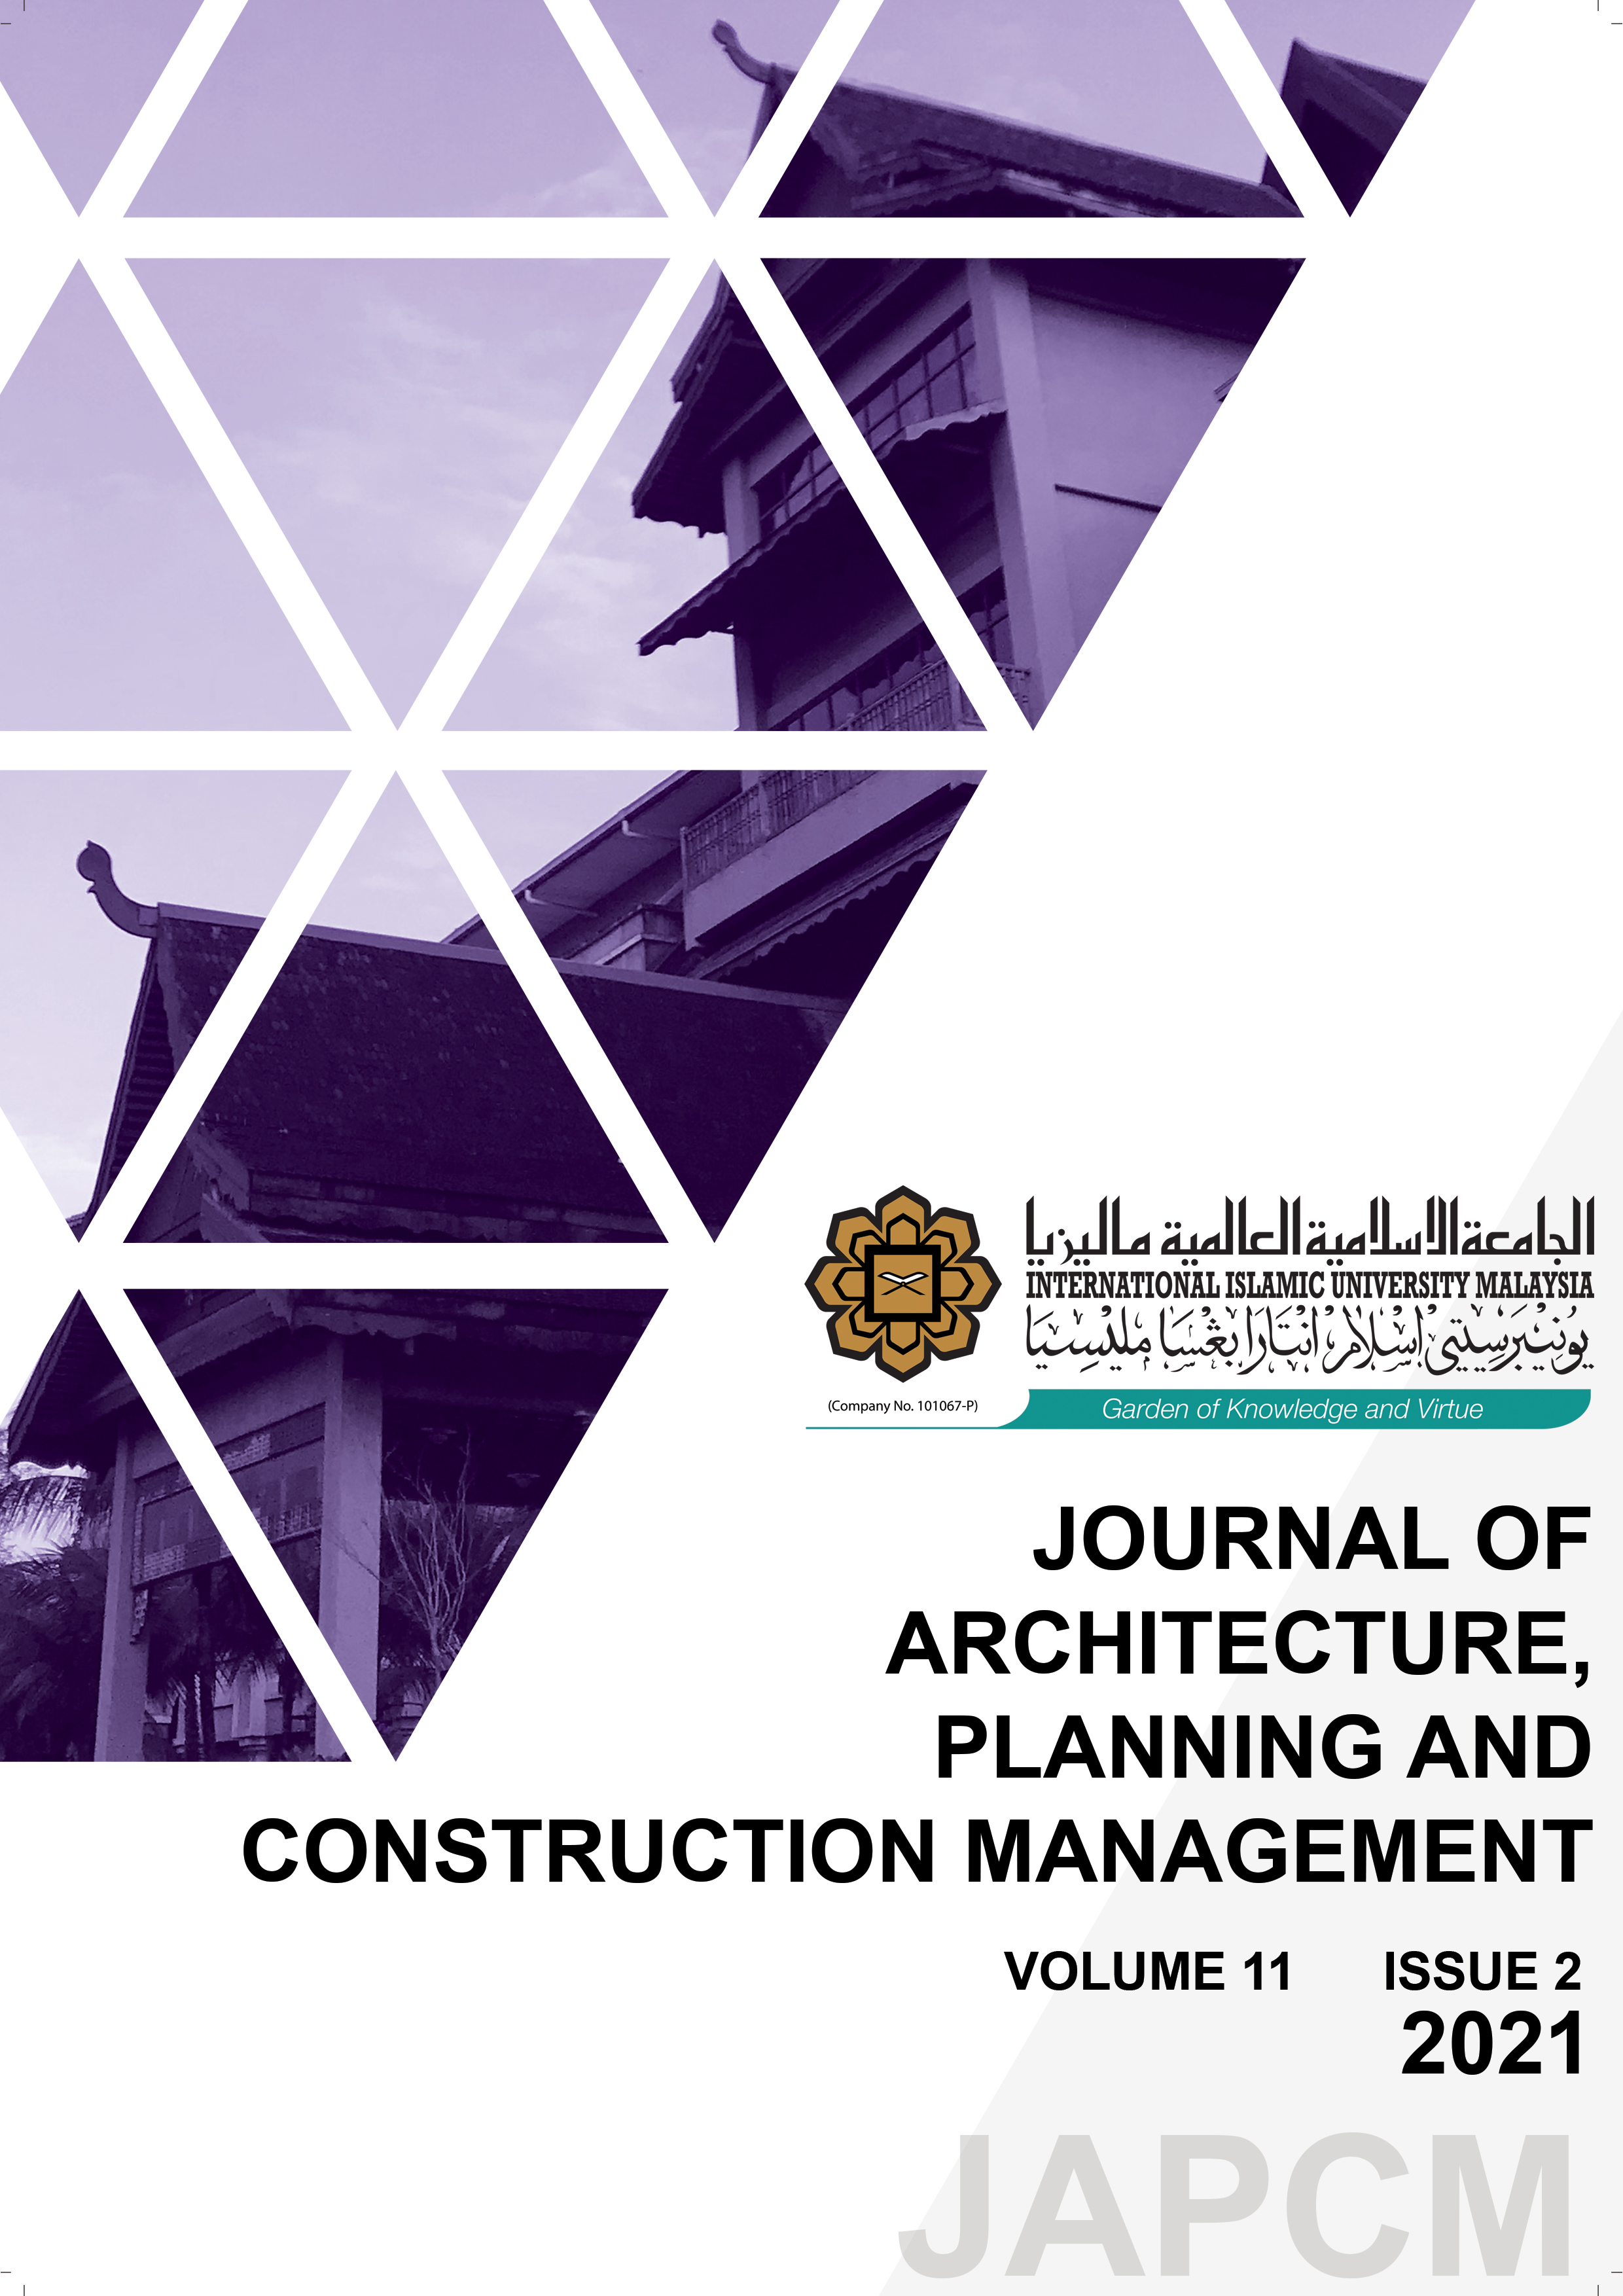 					View Vol. 11 No. 2 (2021): Journal of Architecture, Planning and Construction Management
				